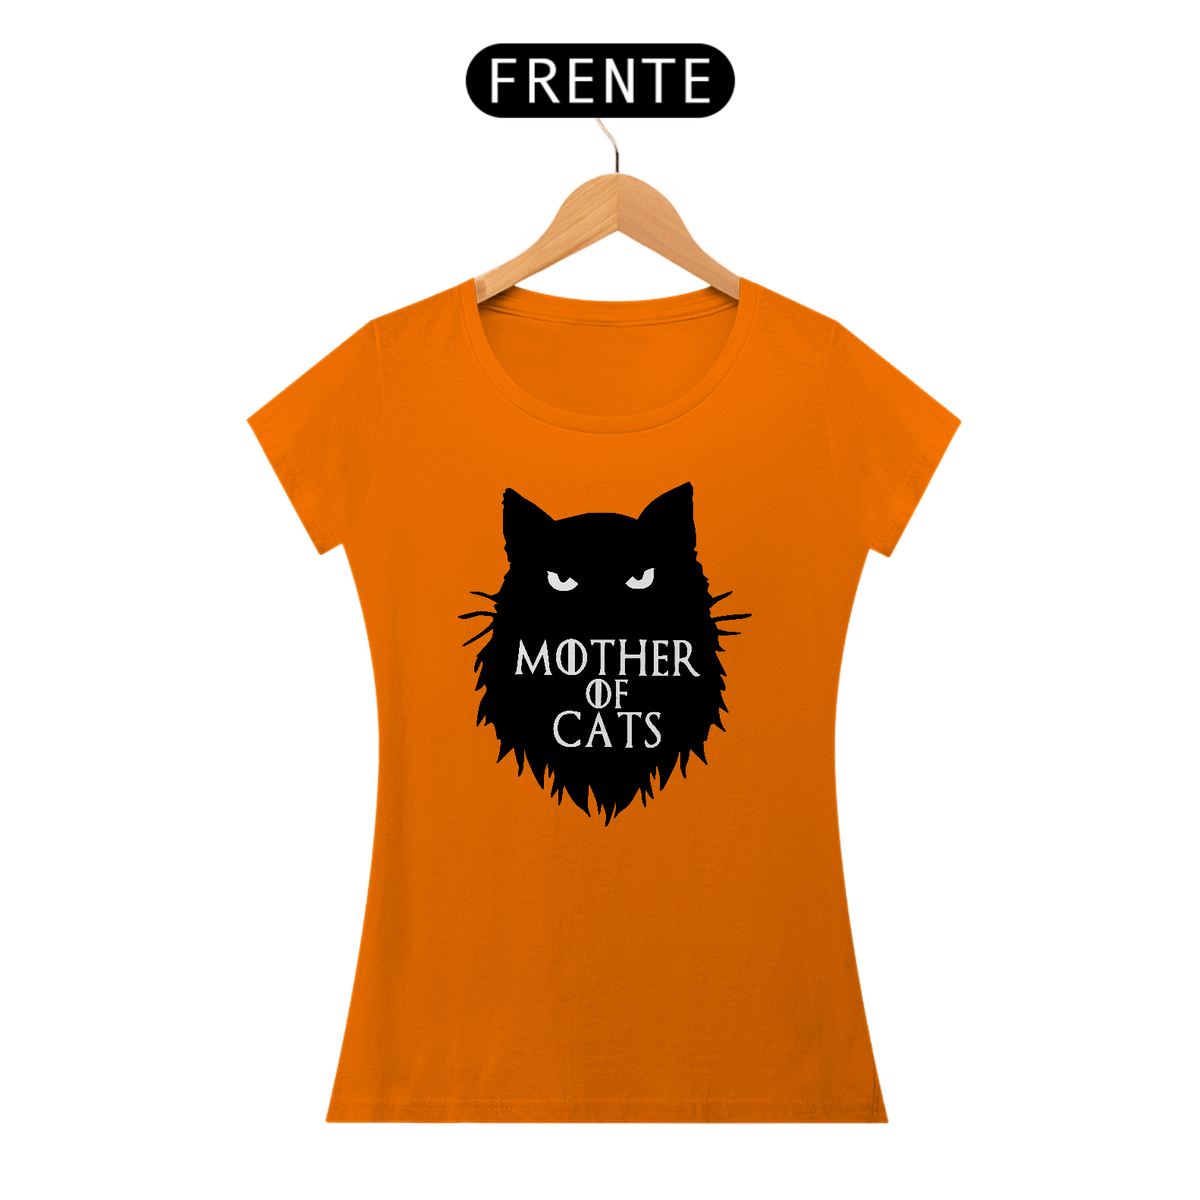 Nome do produto: Camisa Baby Long Quality Mother of Cats